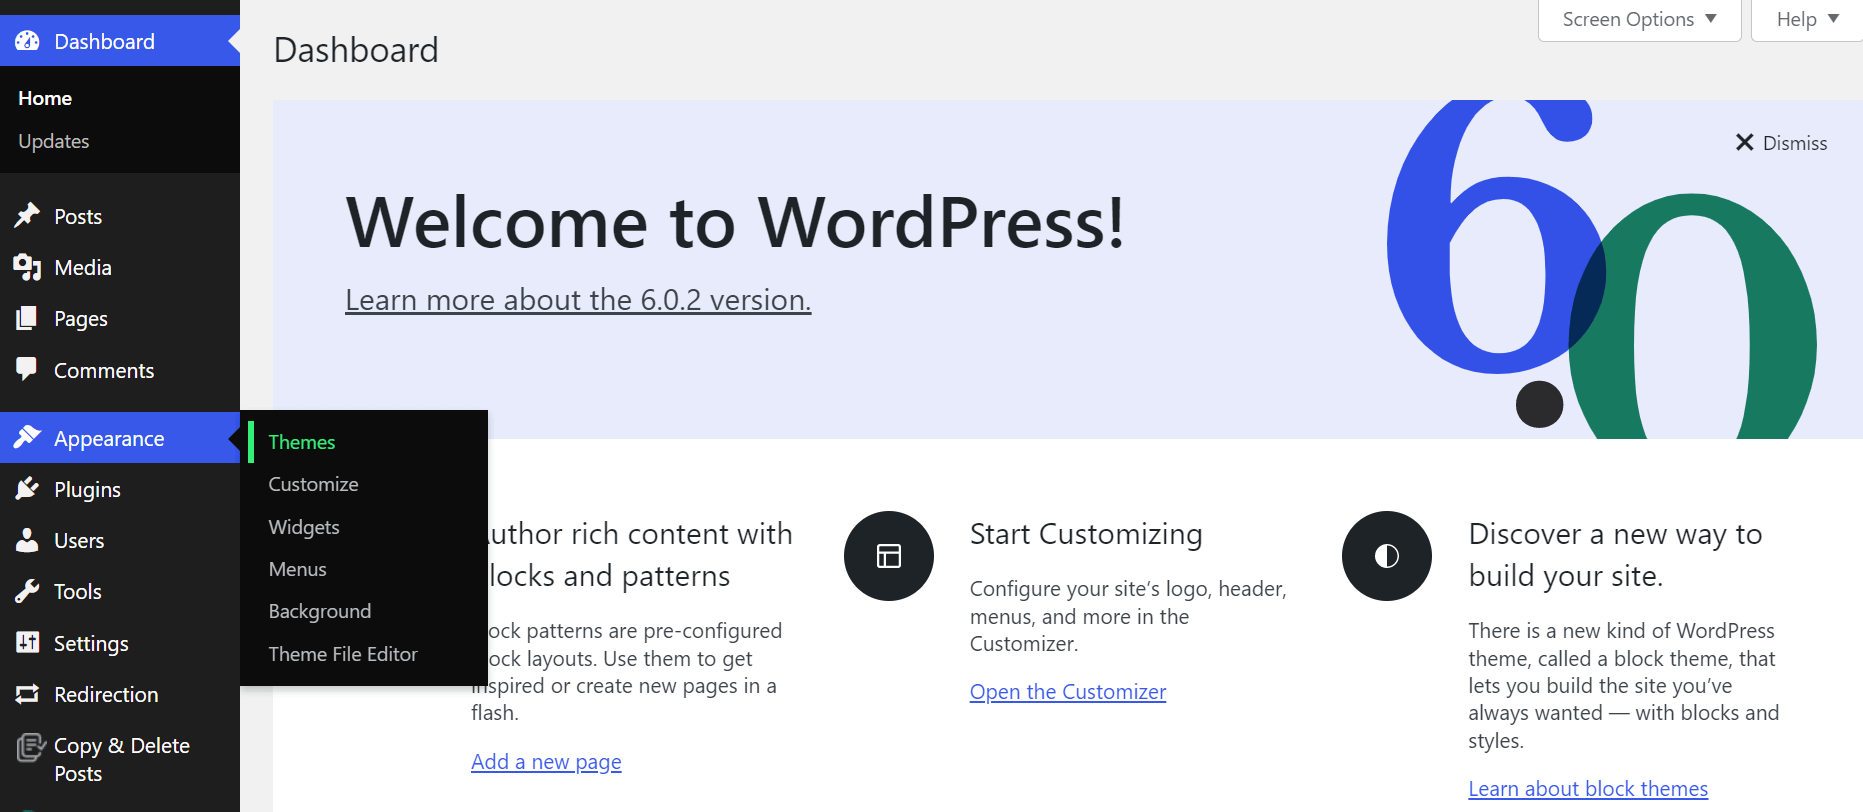 WordPress dashbaord with the "Appearance" submenu opened to "Themes".